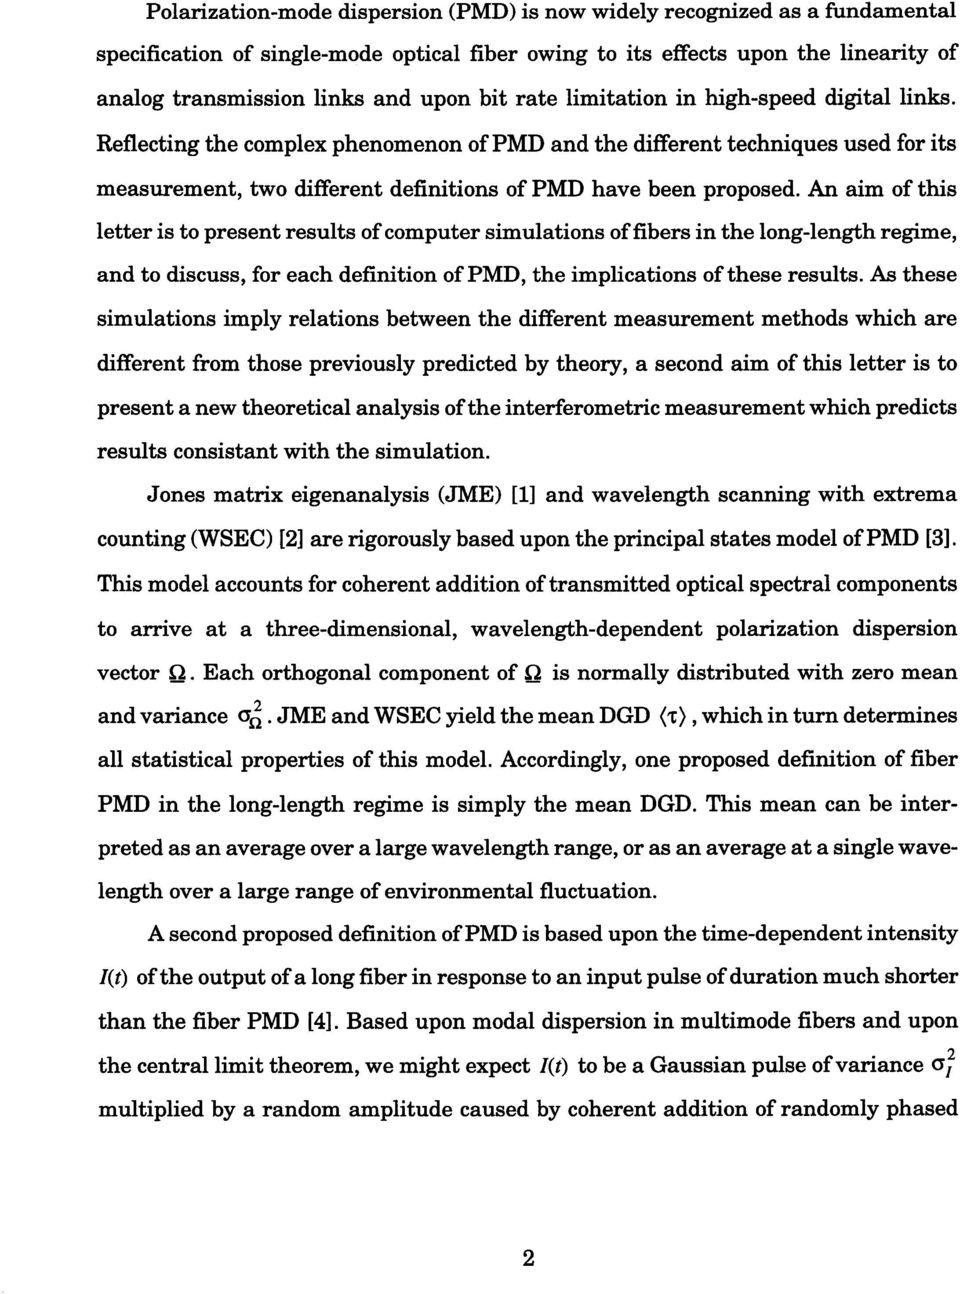 An aim of this letter is to present results of computer simulations of fibers in the long-length regime, and to discuss, for each definition ofpmd, the implications ofthese results.